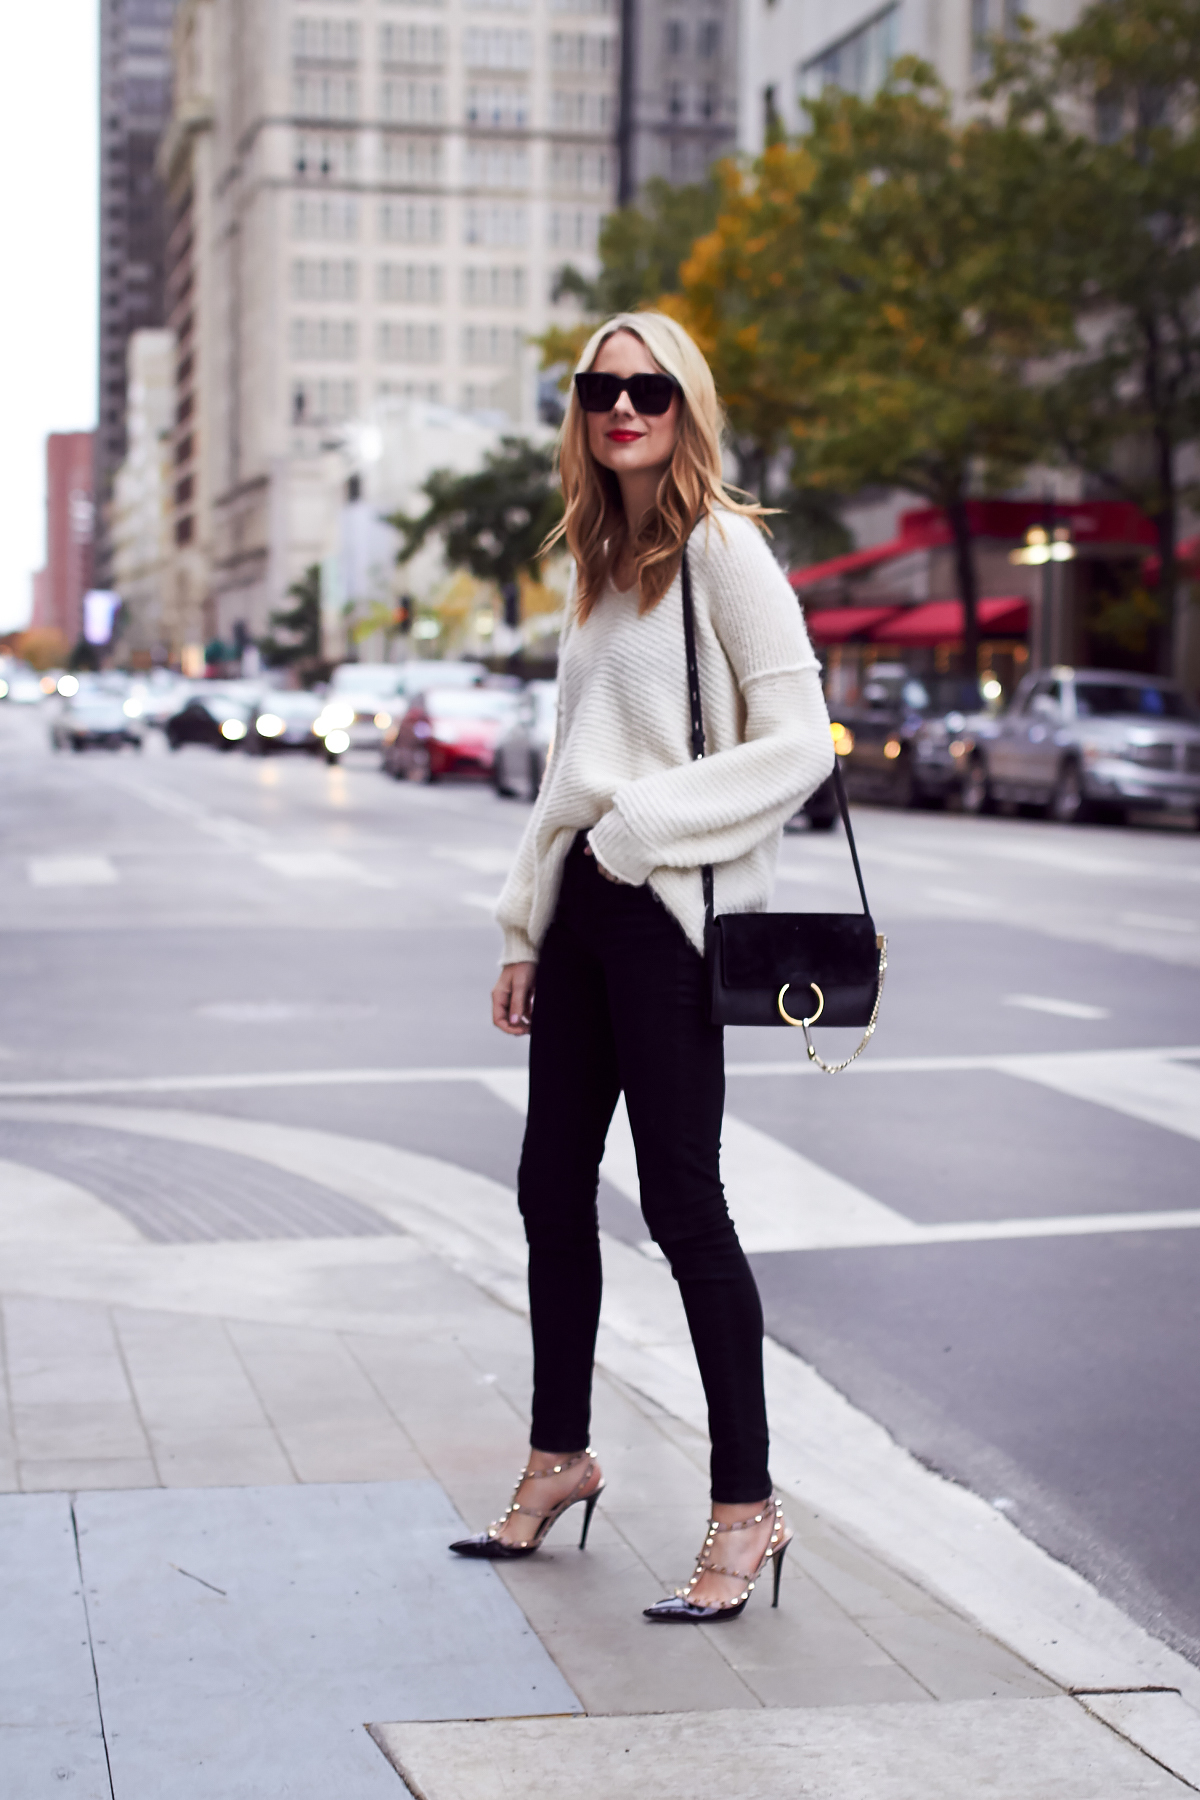 Fall Outfit, Winter Outfit, Ivory Sweater, Black Skinny Jeans, Valentino Rockstud Pumps, Chloe Faye Handbag, Red Lipstick